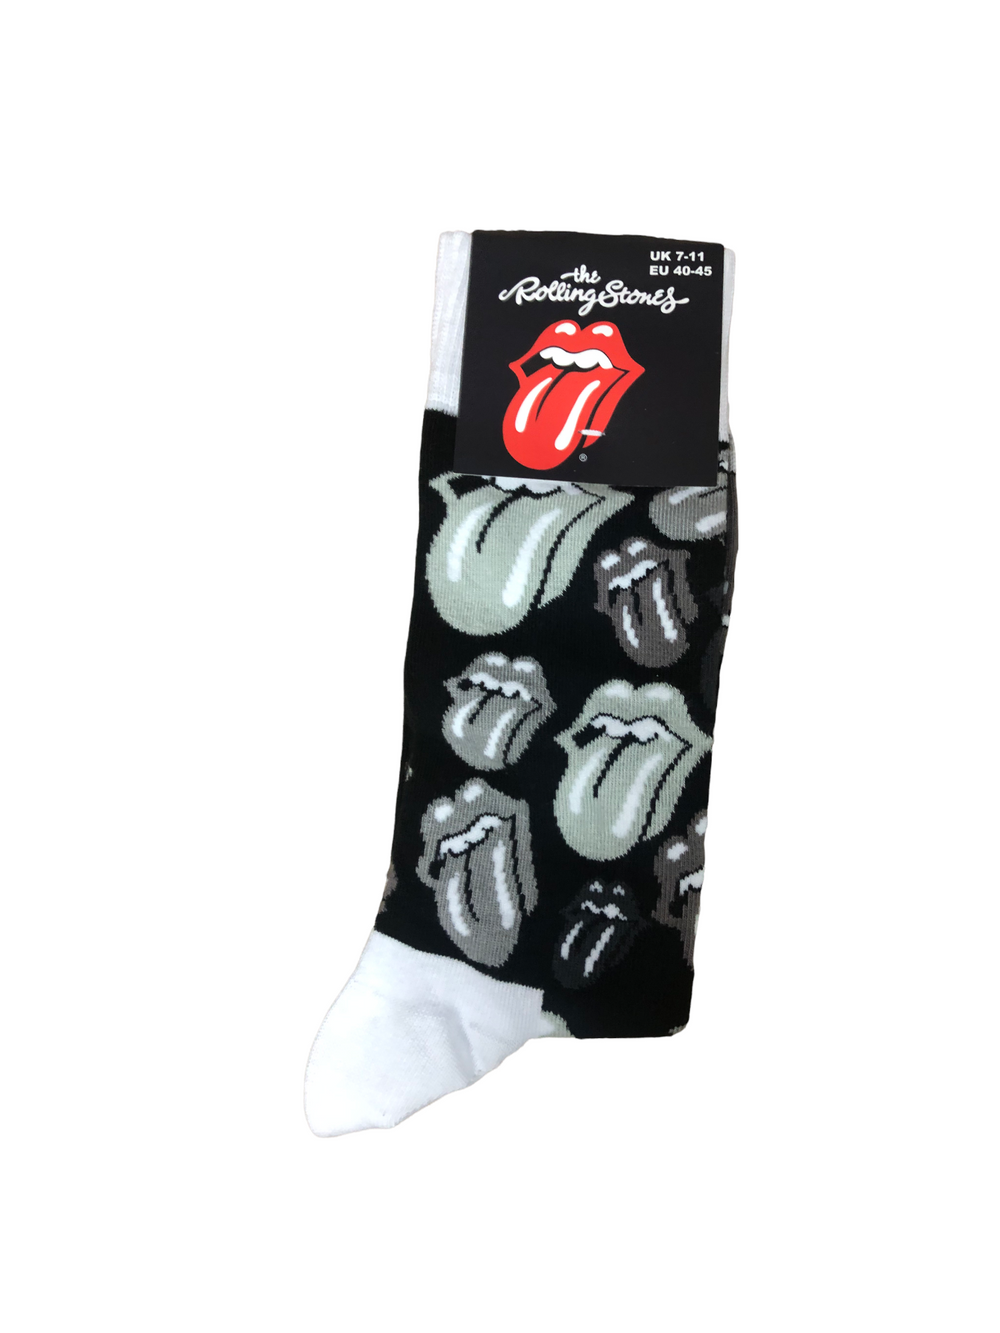 Rolling Stones The - CLASSIC TONQUES Official Product 1 Pair Jacquard Socks NEW